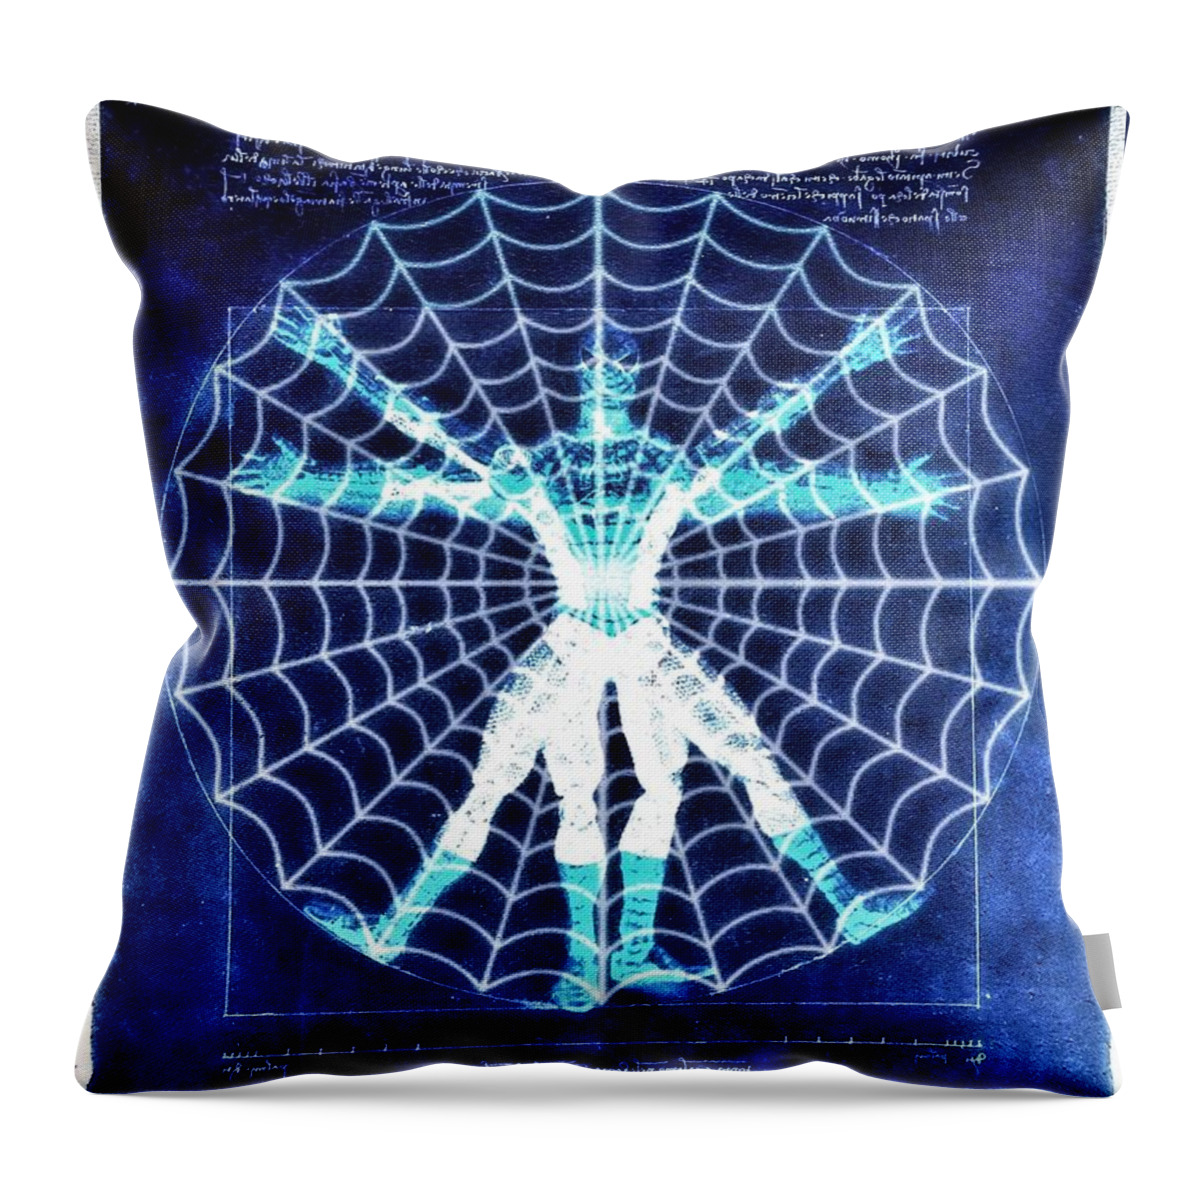 Spider-man Throw Pillow featuring the digital art Vitruvian Spiderman white in the sky by HELGE Art Gallery